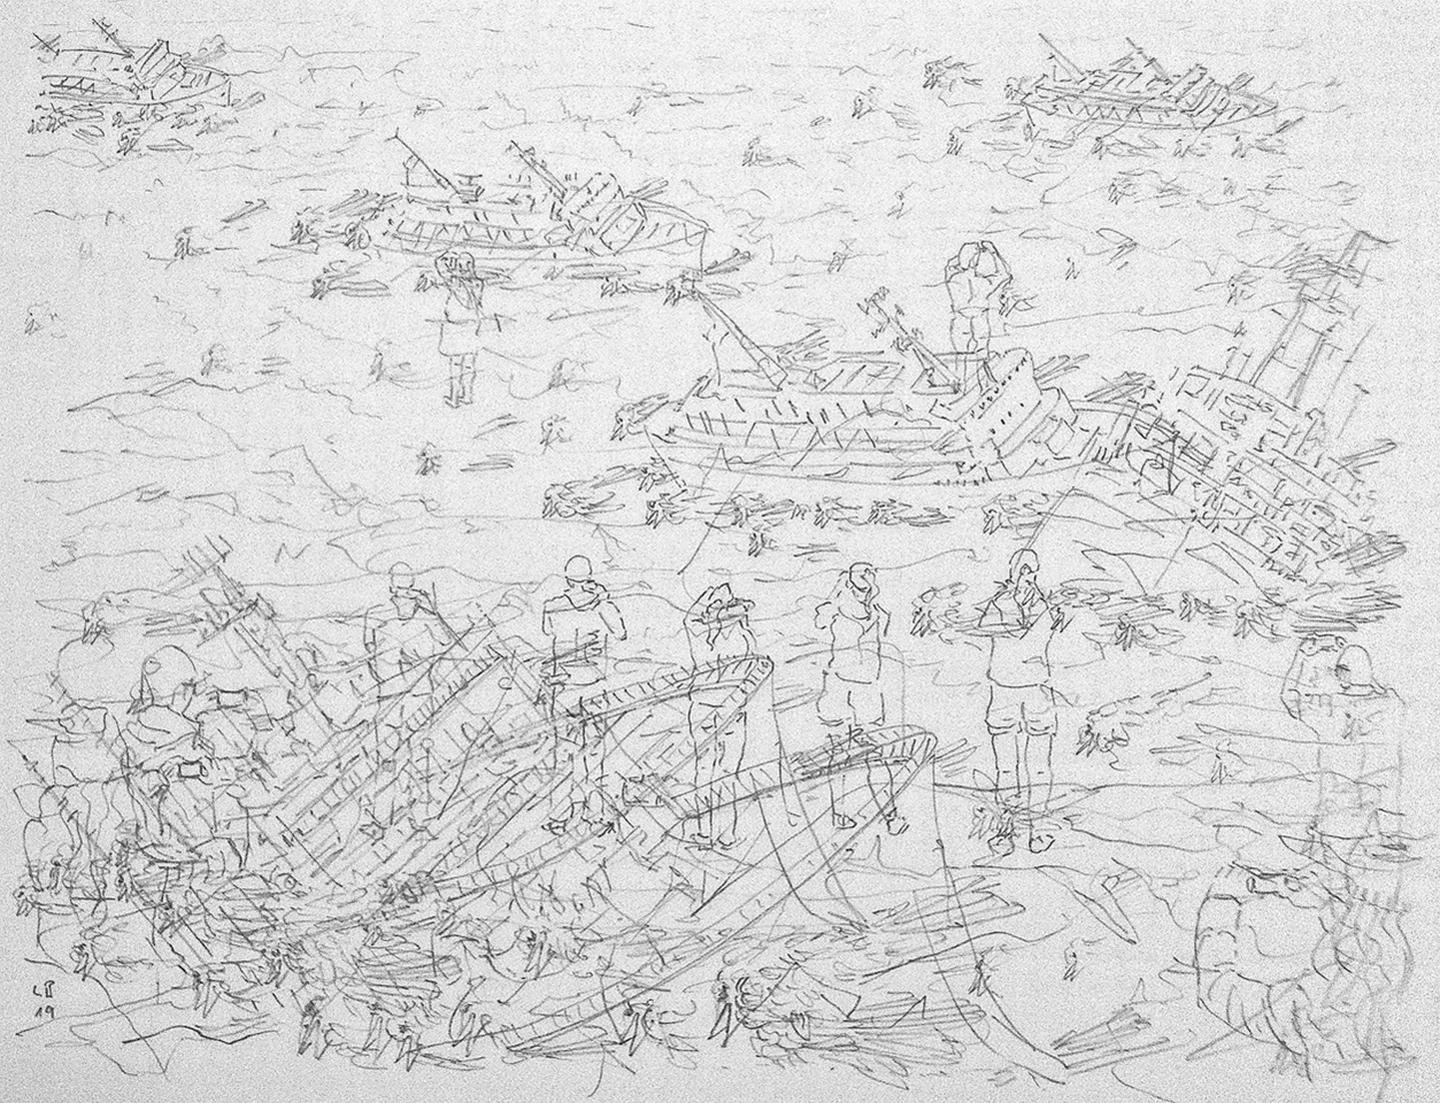 Leo Brunschwiler, sinking ships, dead redtails and tourists, pencil on polyester foil, 28 cm x 35 cm , 2019